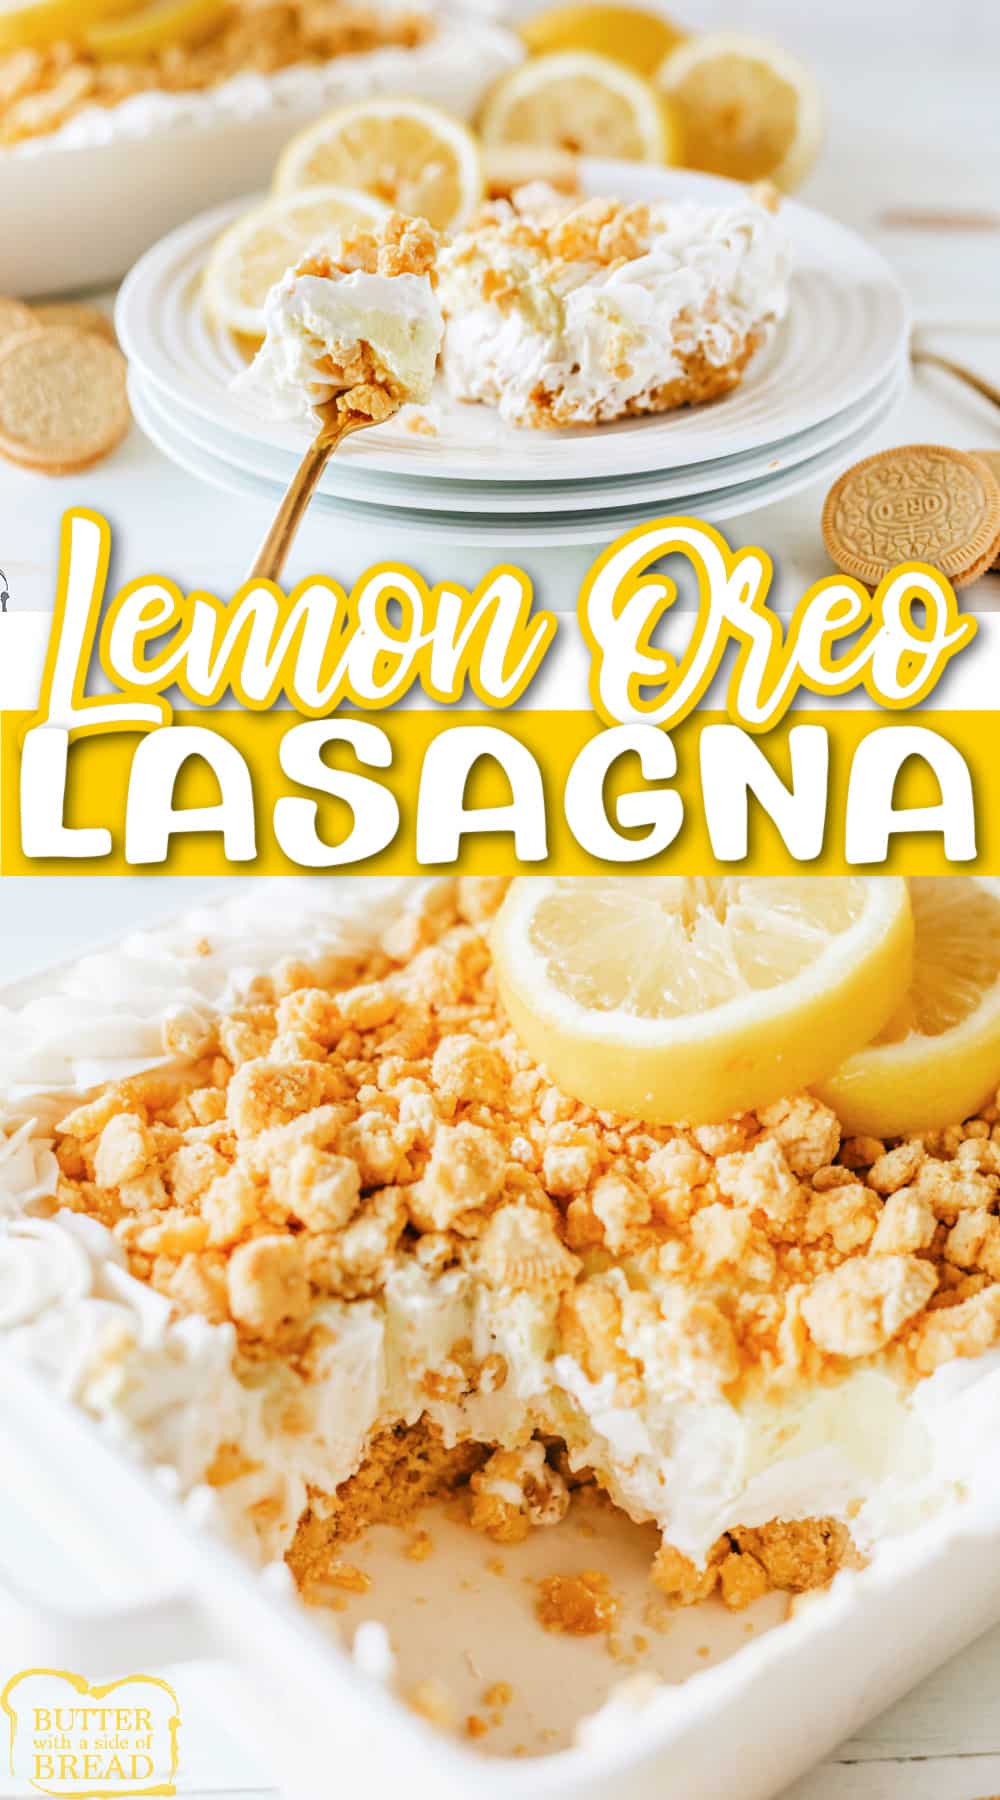 Lemon Oreo Lasagna is a no-bake layered dessert that is easy to make! This delicious lemon dessert recipe is made with Lemon Oreos, whipped topping, cheesecake pudding, lemon pie filling, and a few other basic ingredients.